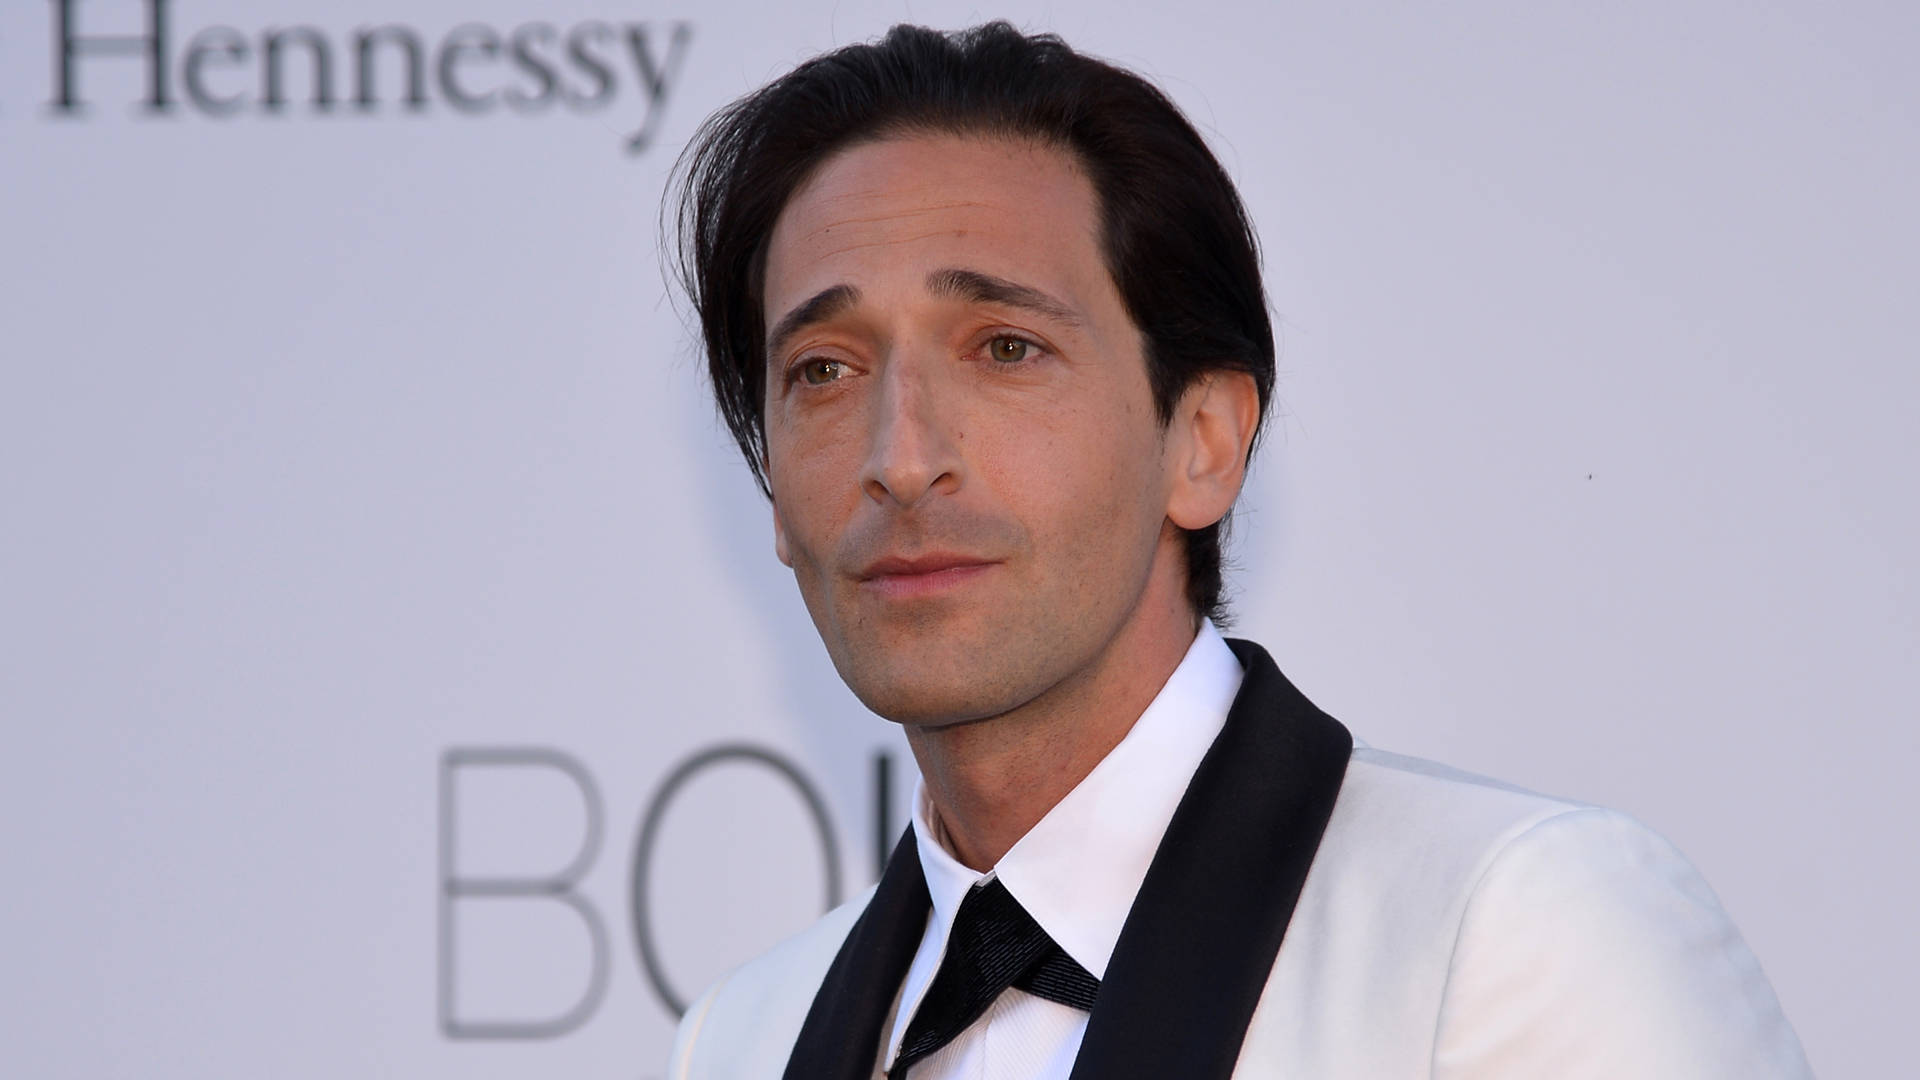 Adrien Brody In A Stunning White Suit. Background